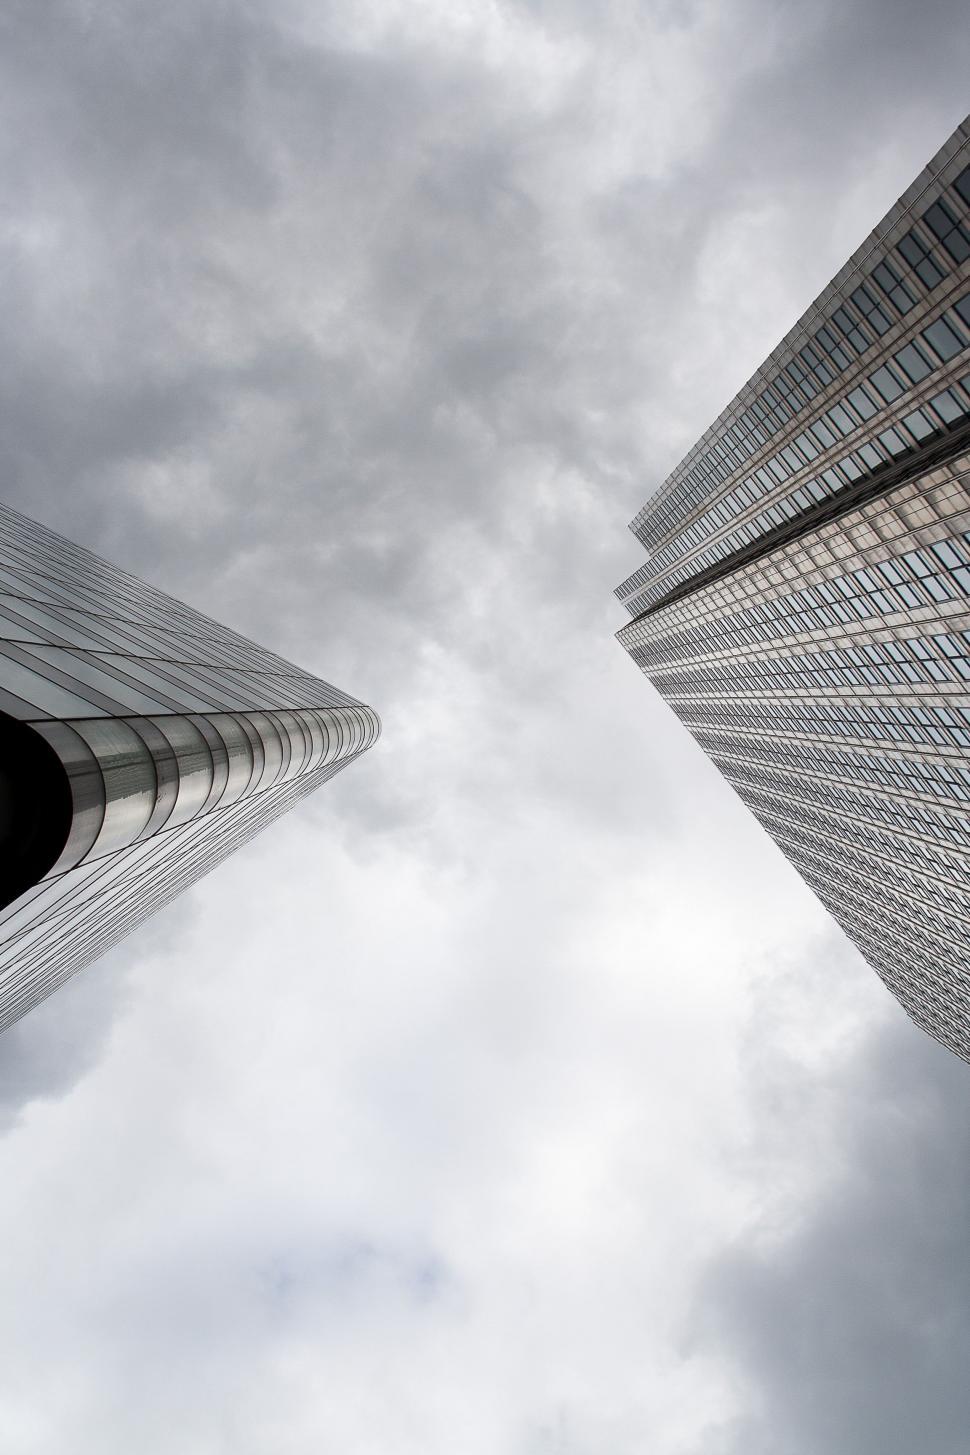 Free Image of Buildings and clouds from below 